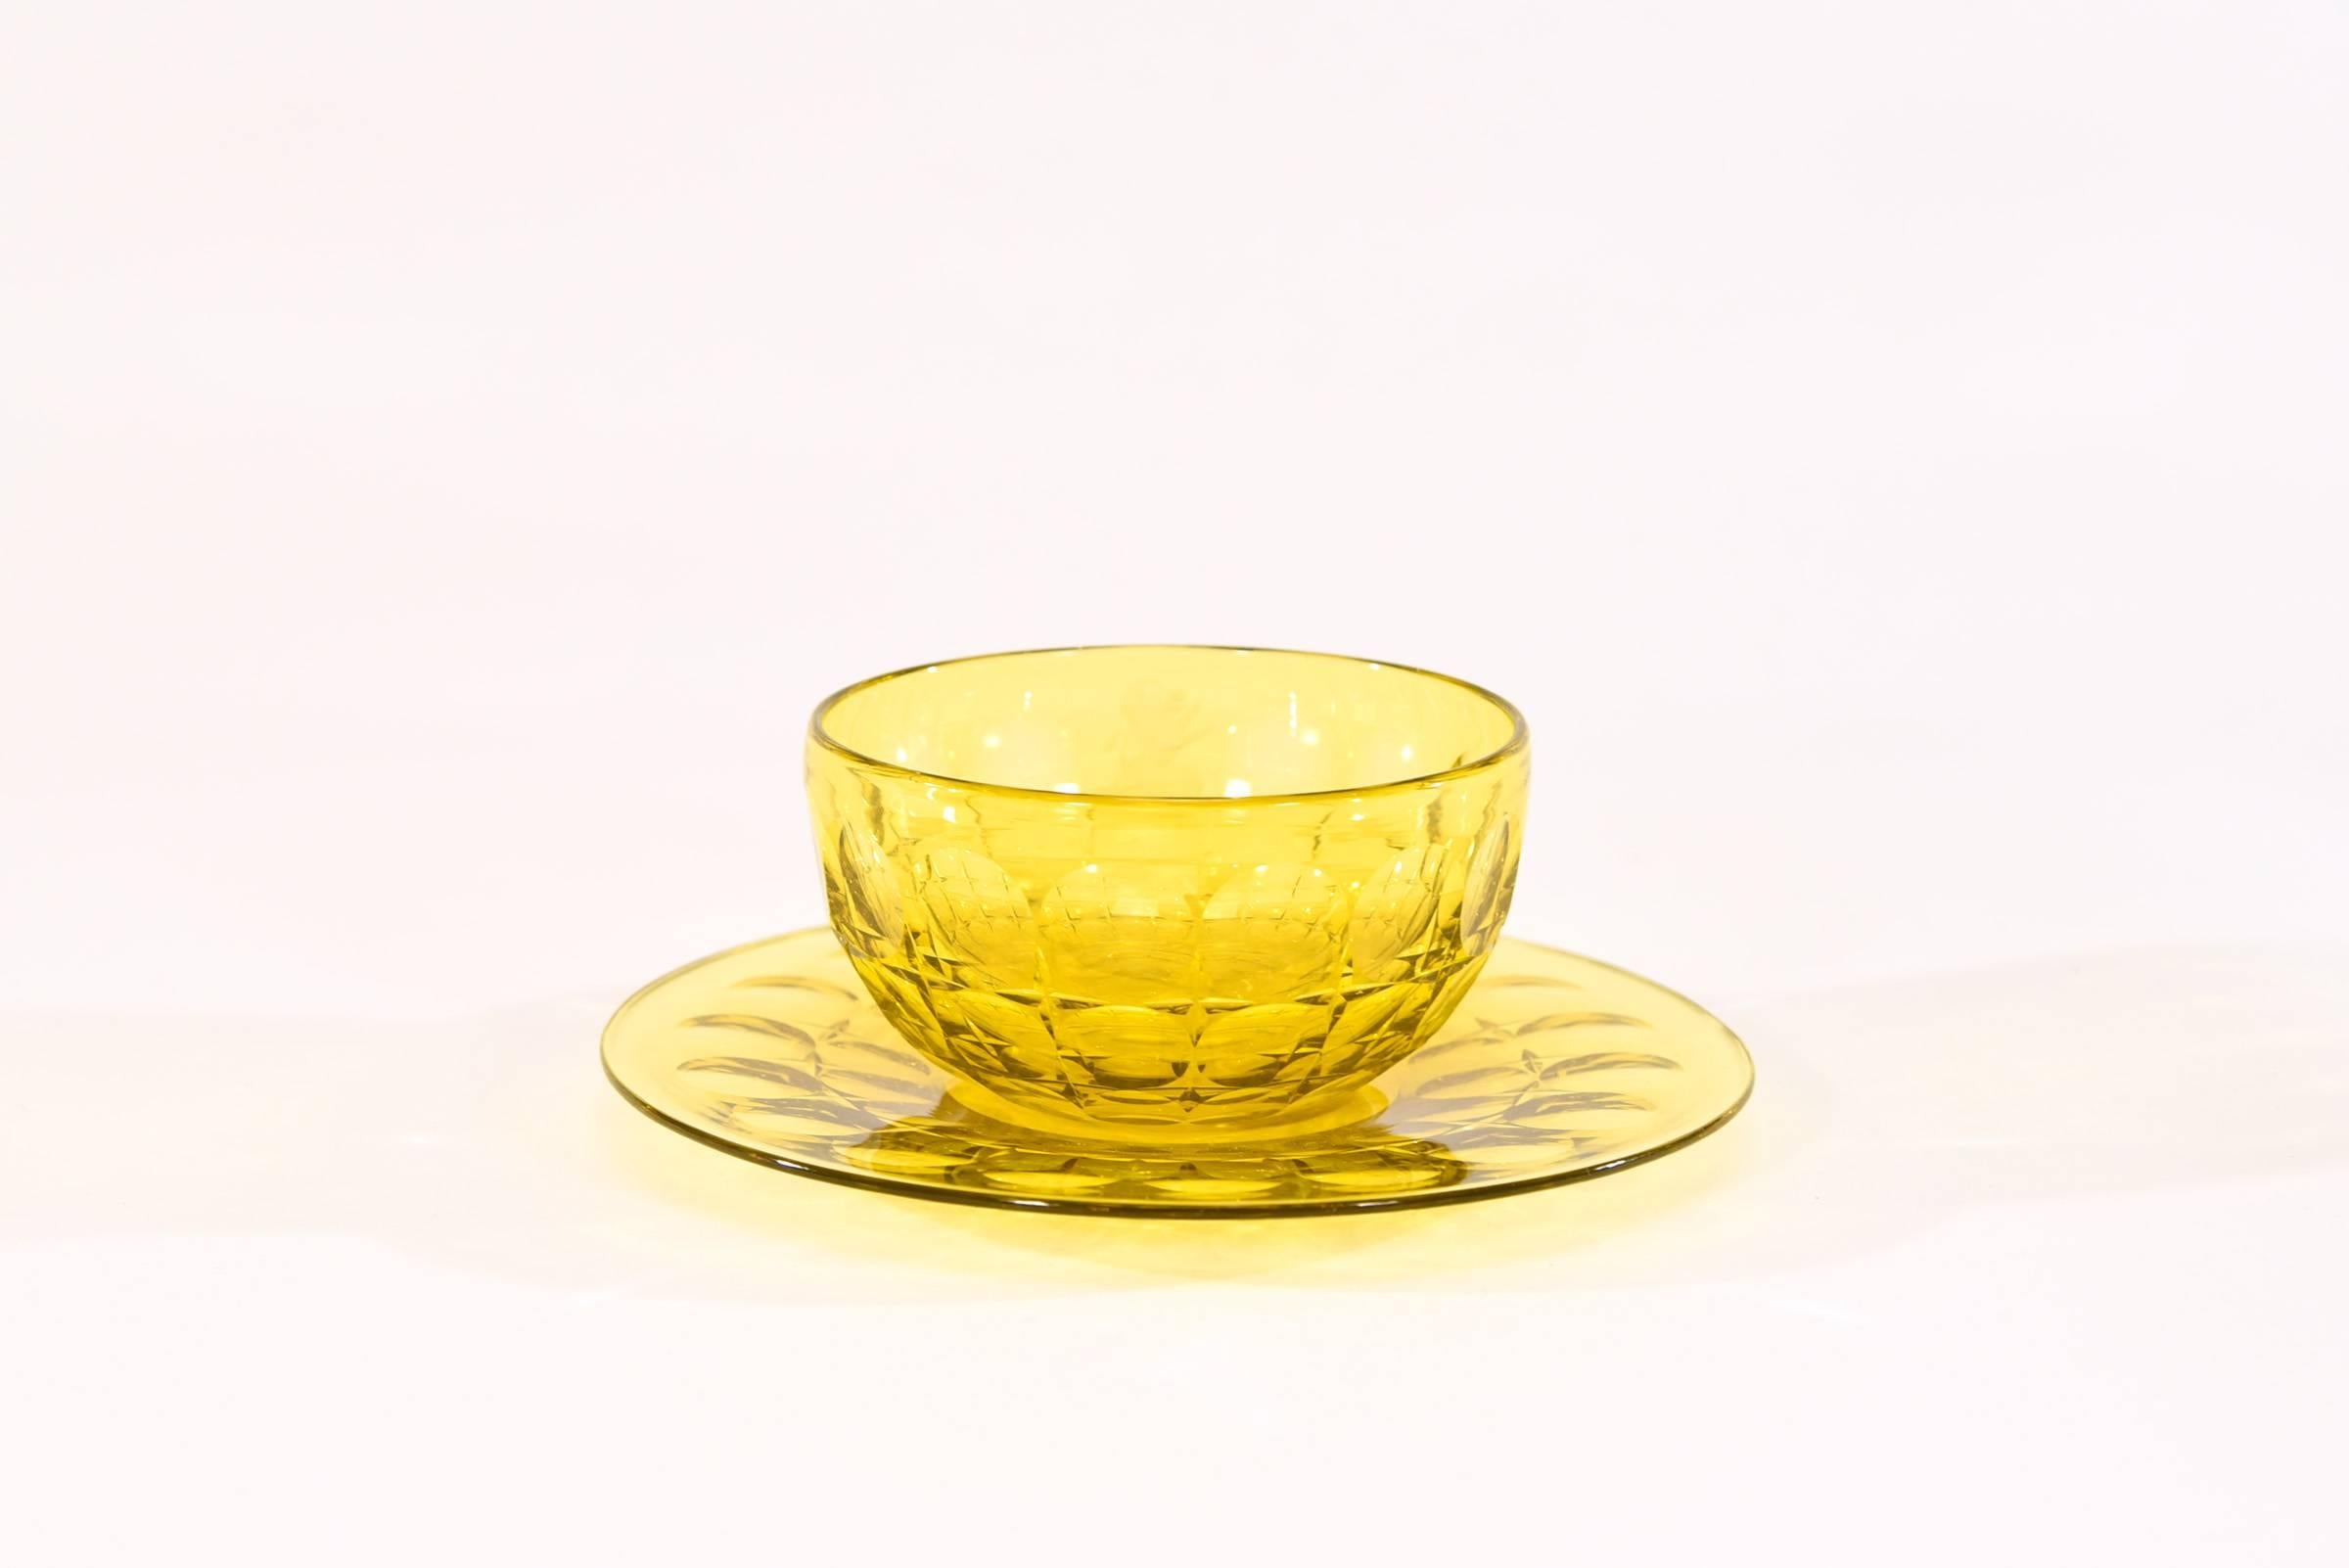 Not 12, but a set of 16 hand blown Bristol Yellow crystal bowls and underplates made by Steuben, Carder Period Ca. 1920's. Most likely a custom order with a rare pattern of large bowls 5